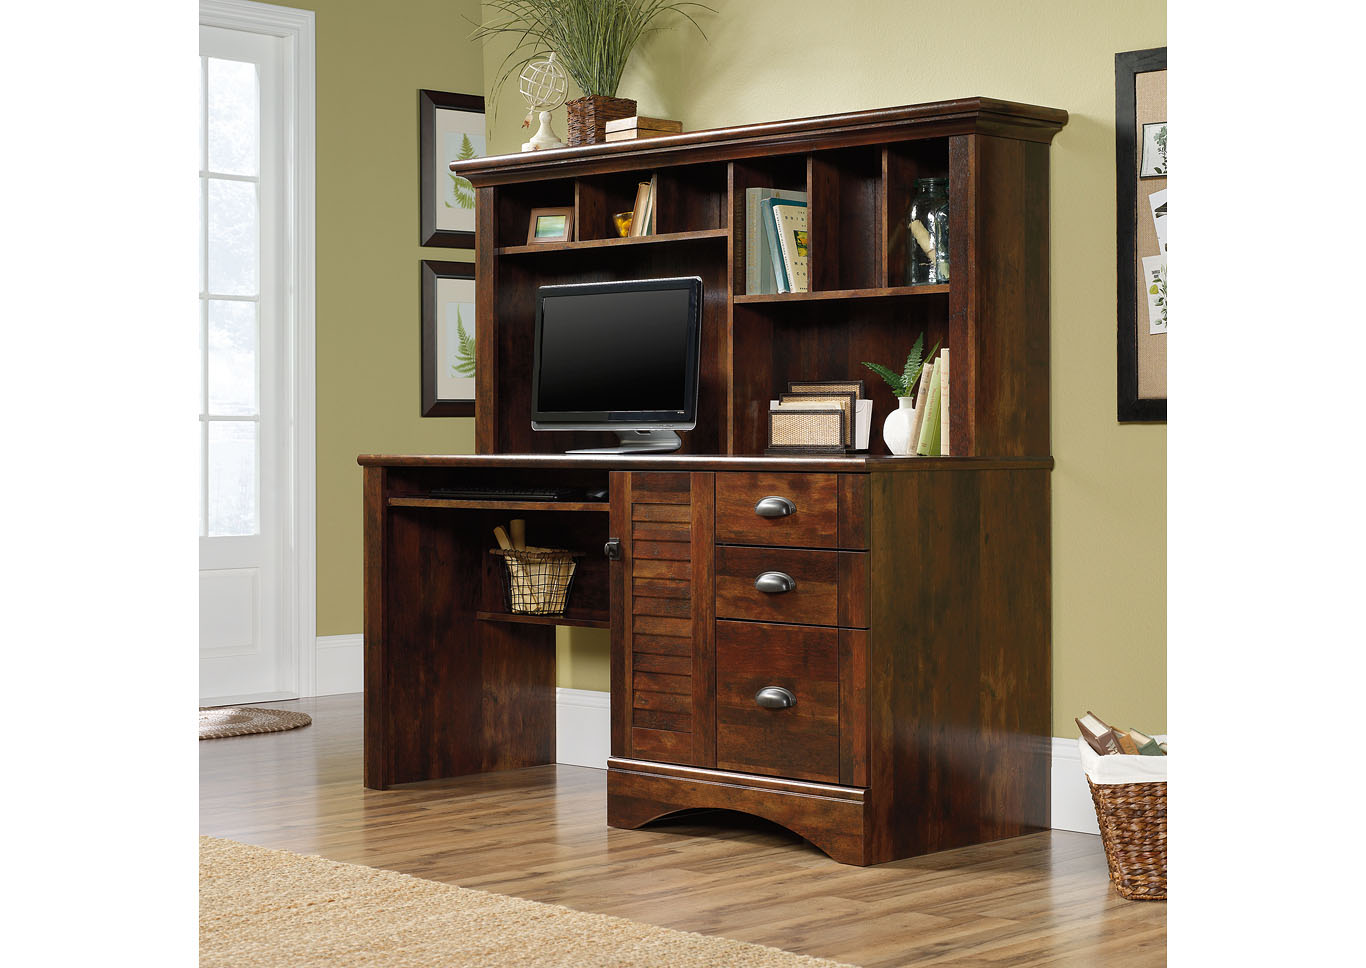 Roses Flooring And Furniture Harbor View Curado Cherry Computer